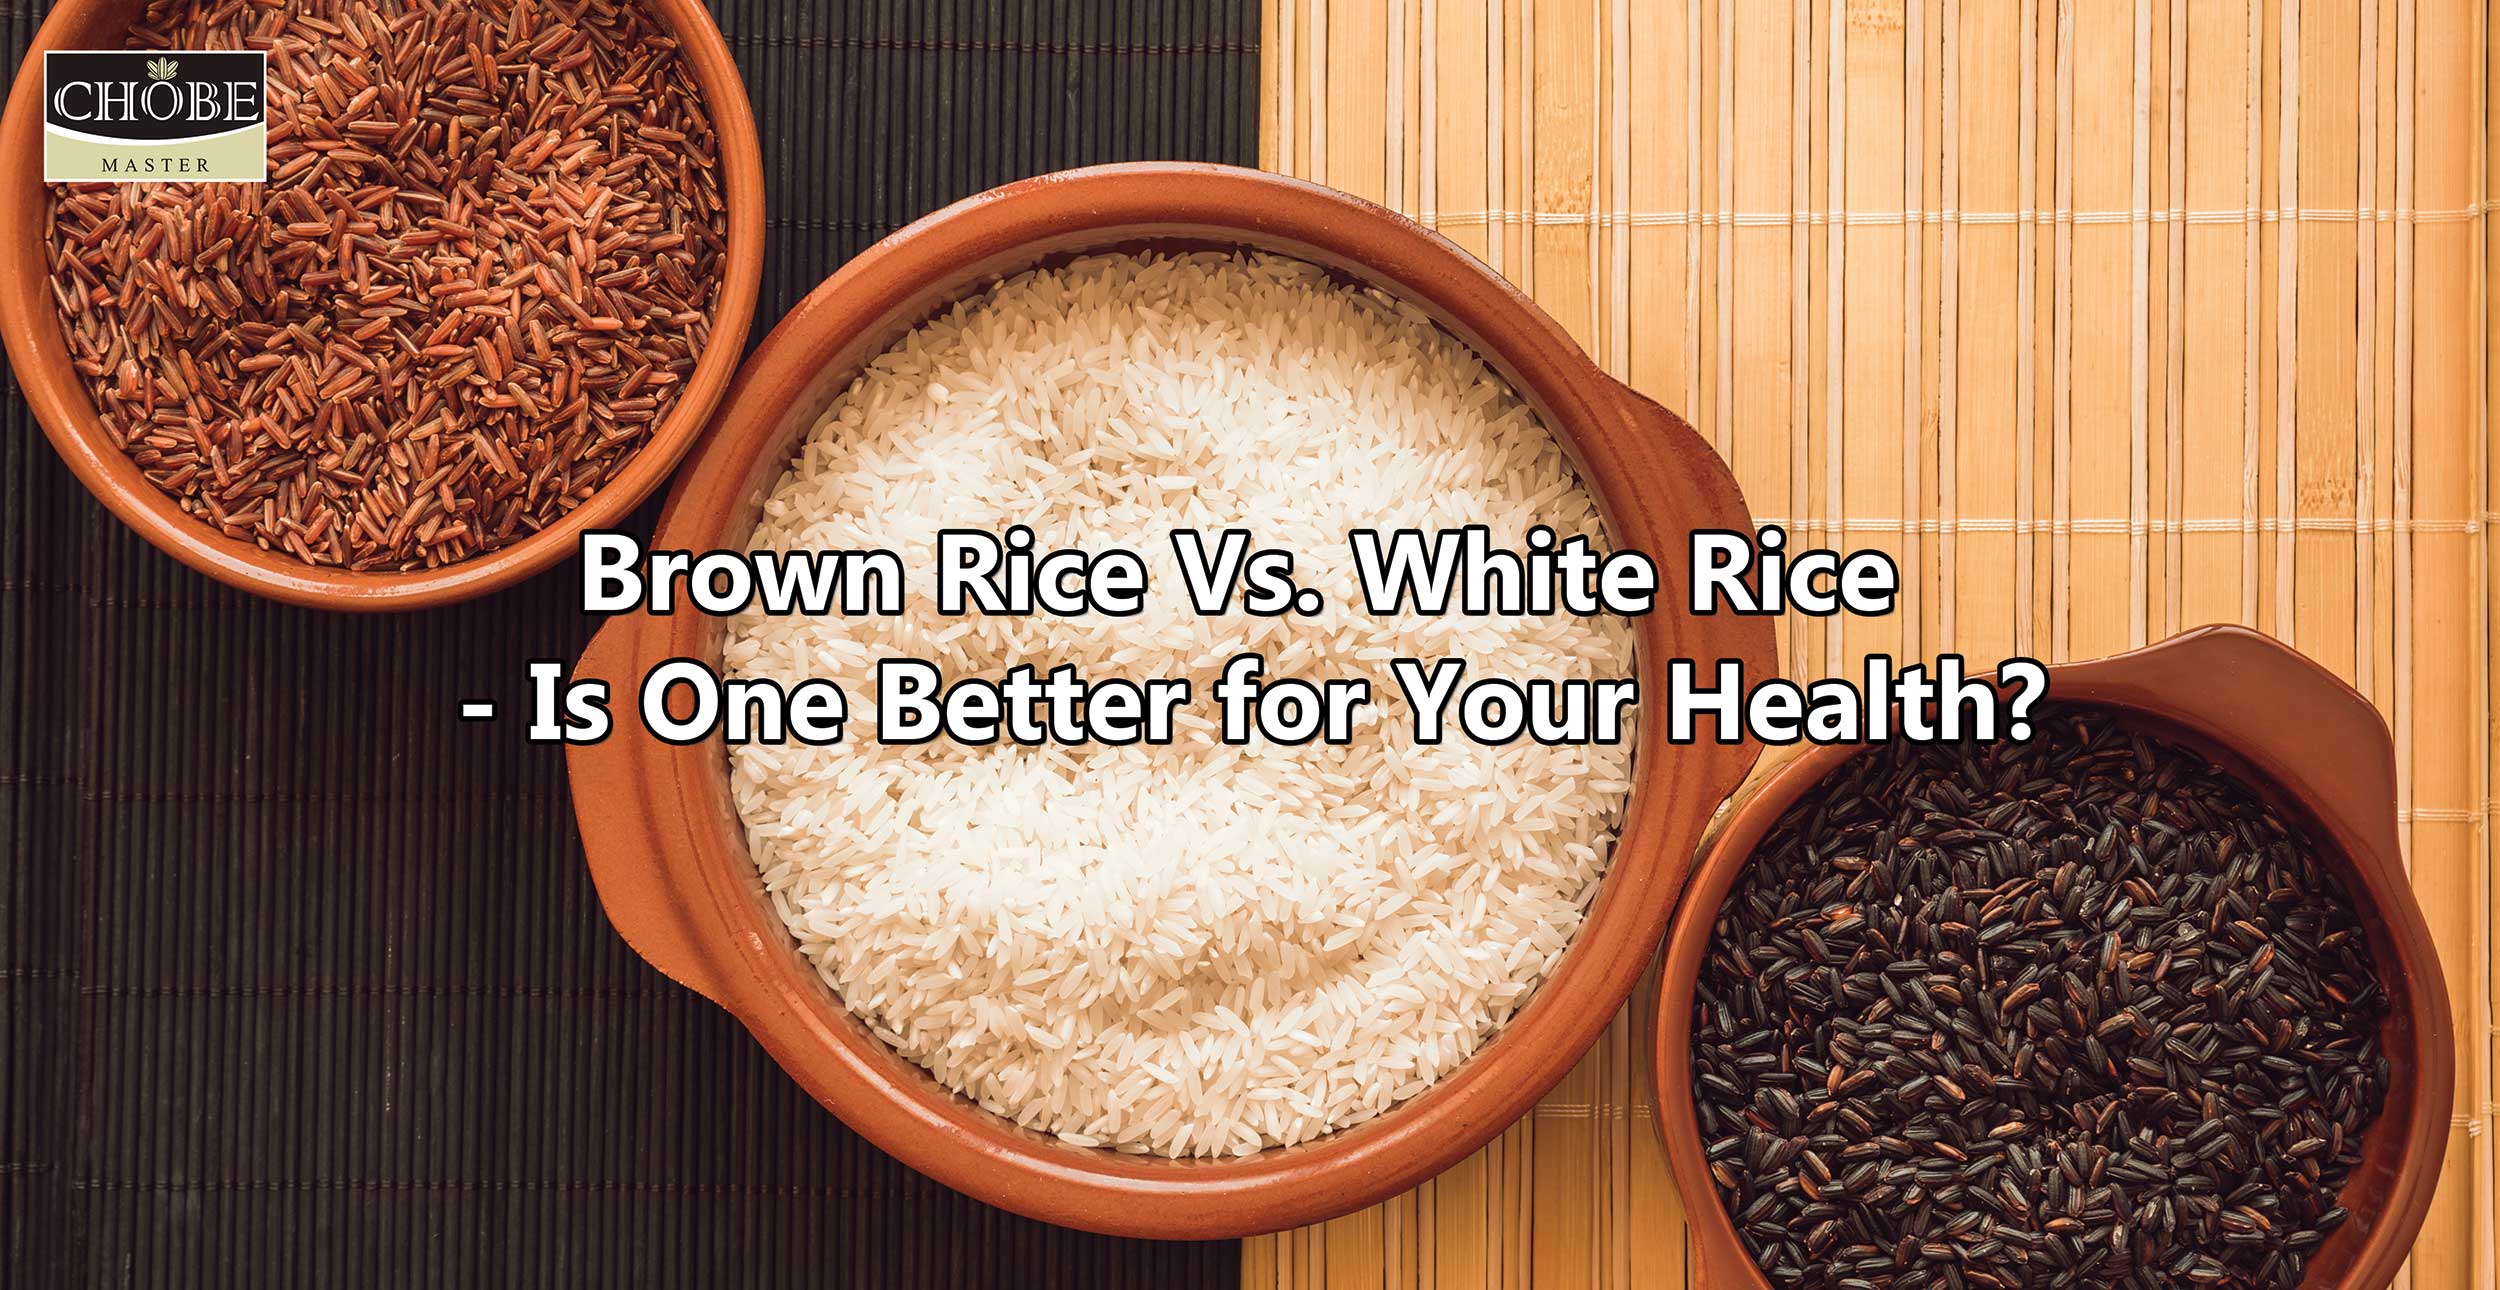 Brown Rice Vs. White Rice: Is One Better for Your Health?